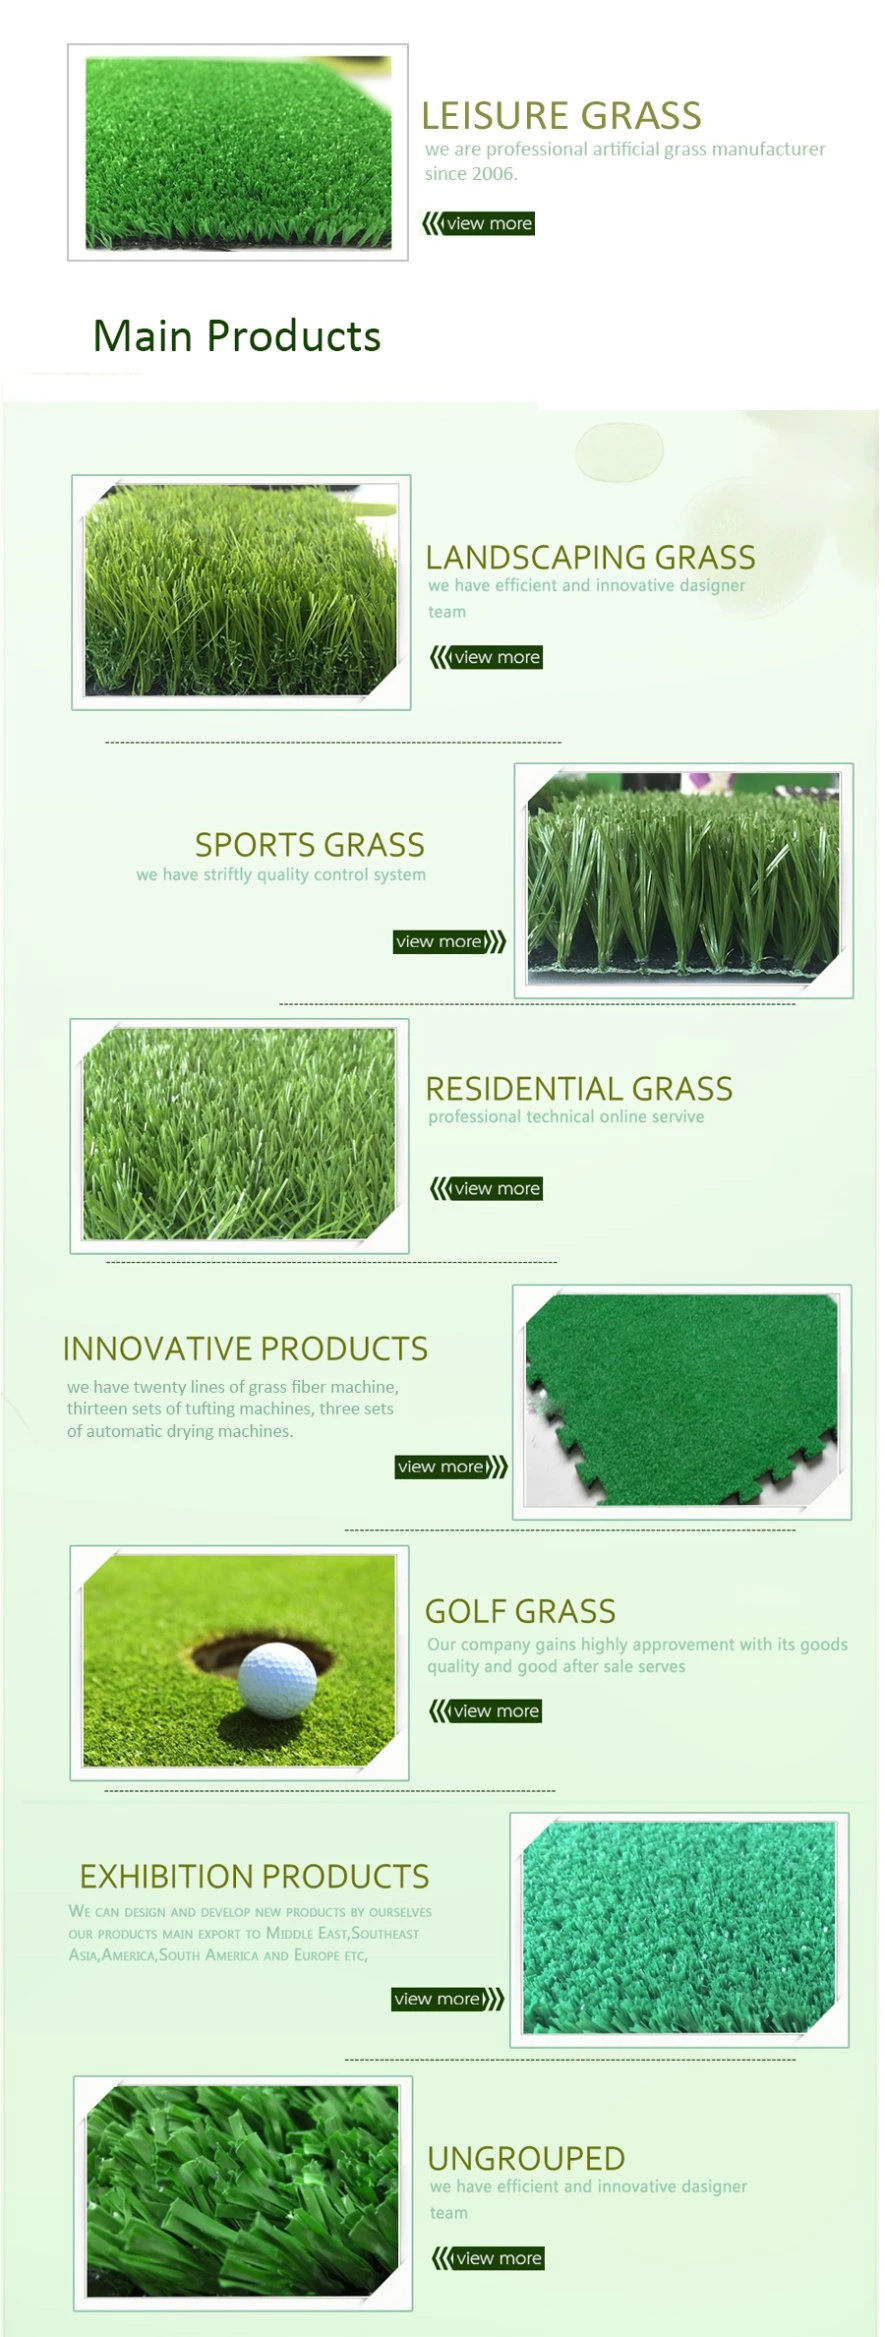 Yellow Colored Artificial Grass Turf Carpet for Garden and Exhibition